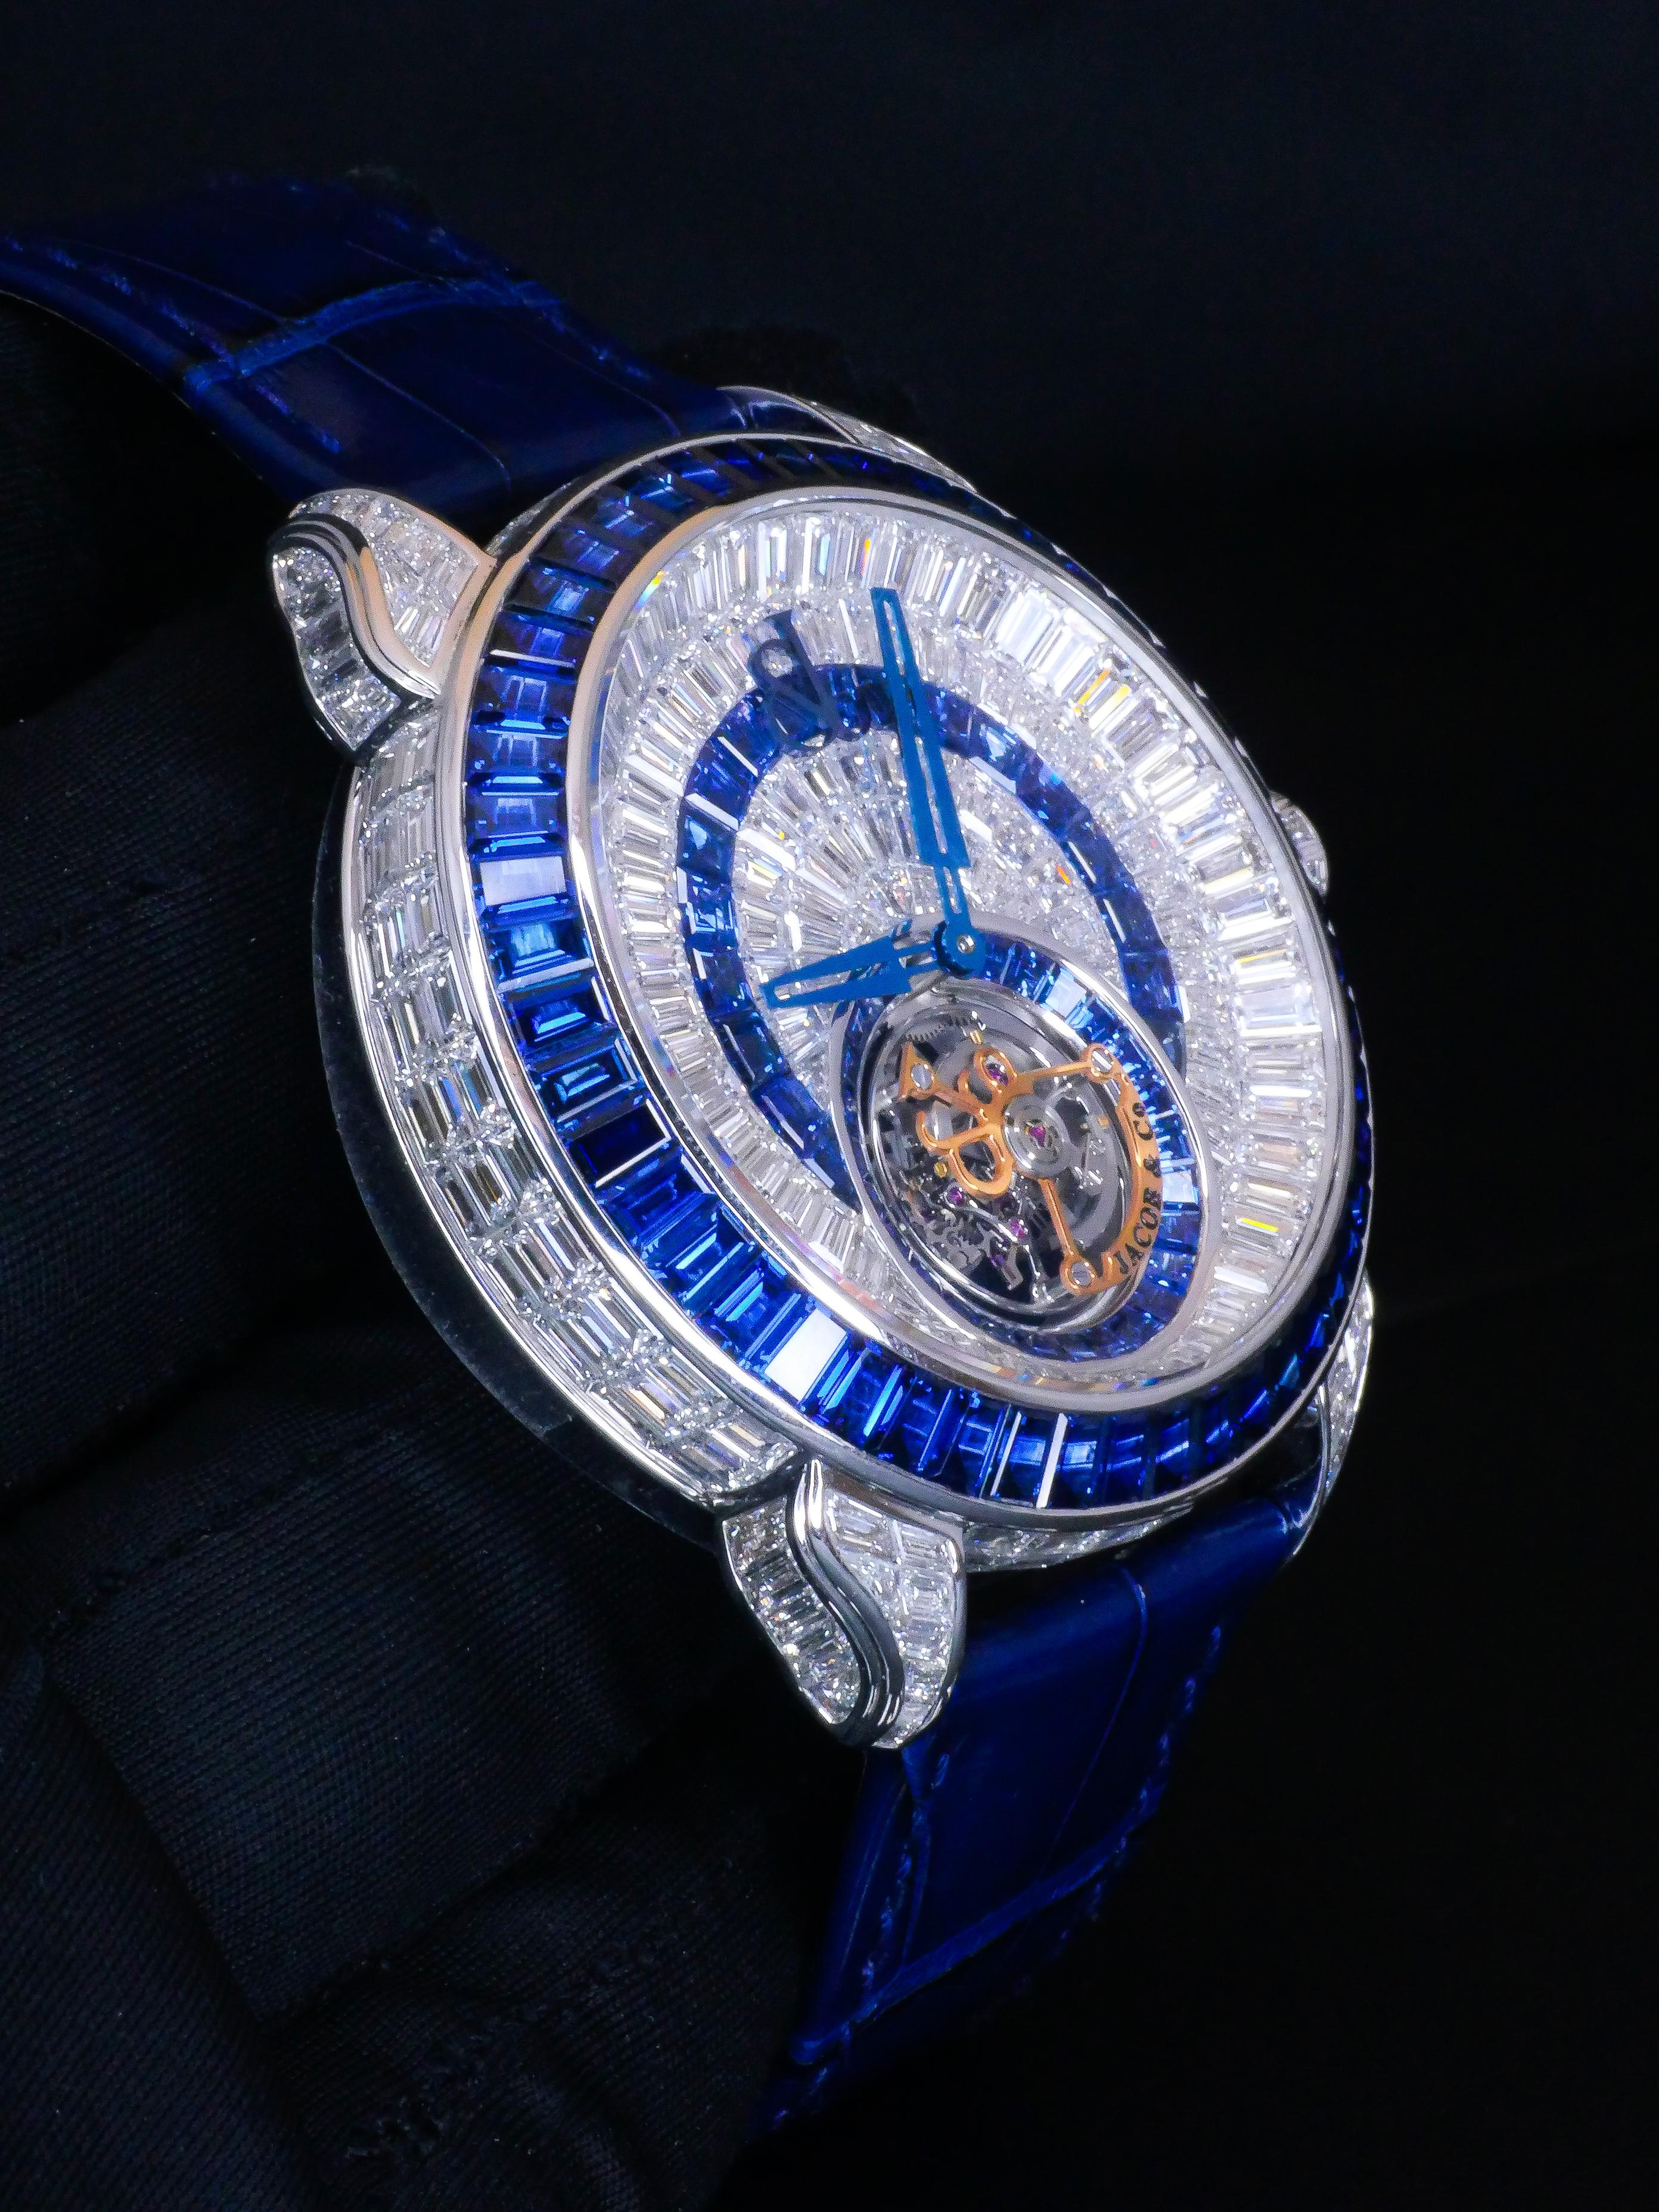 The Palatial Opera Flying Tourbillon is a delightful fusion of time and
light. An exquisite masterpiece of horology and gem setting, each
captivating timepiece requires 18 months to produce. Constructed
to resemble an amphitheater, every superbly